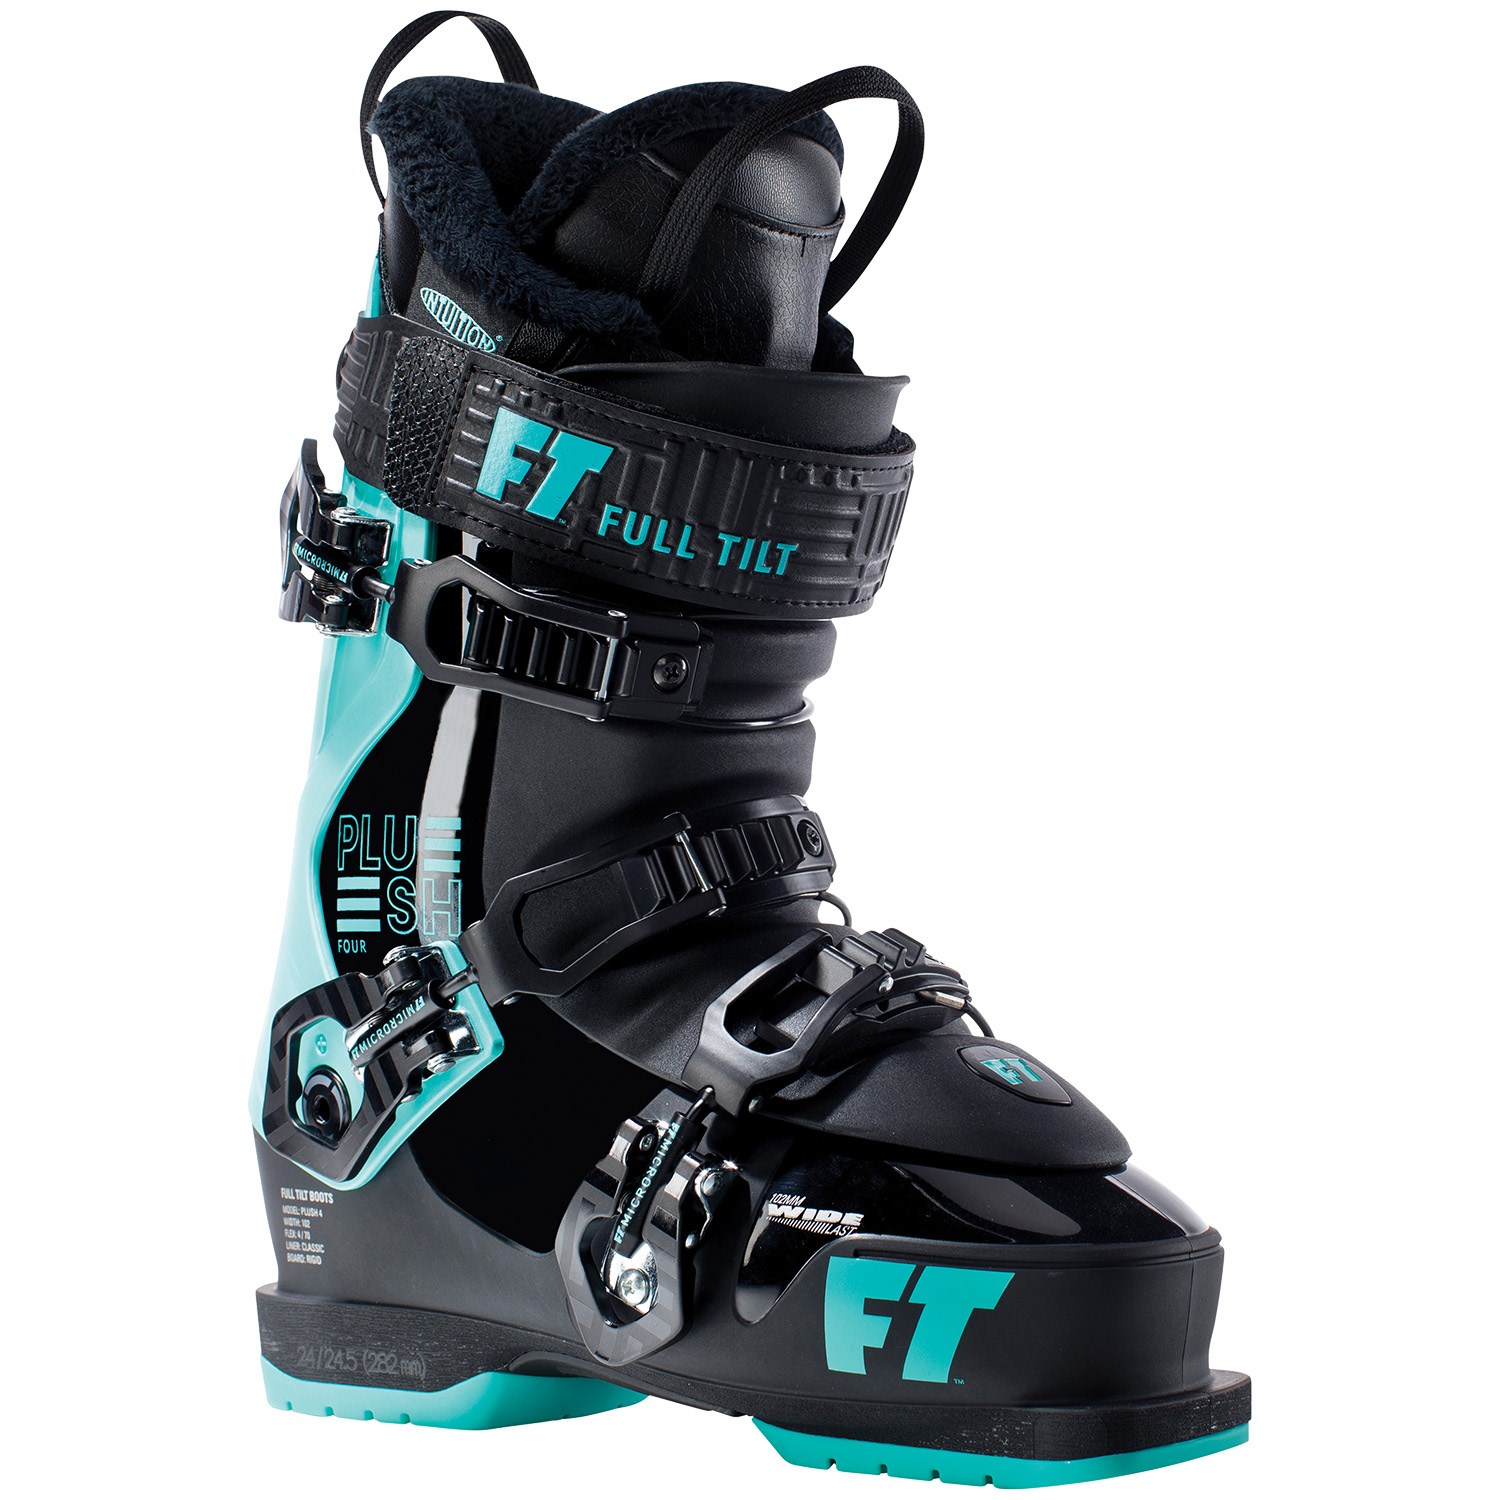 Full Tilt Plush 6 2020| Full Tilt | Ski Full Tilt Plush 4 Ski Boots - Wom.....